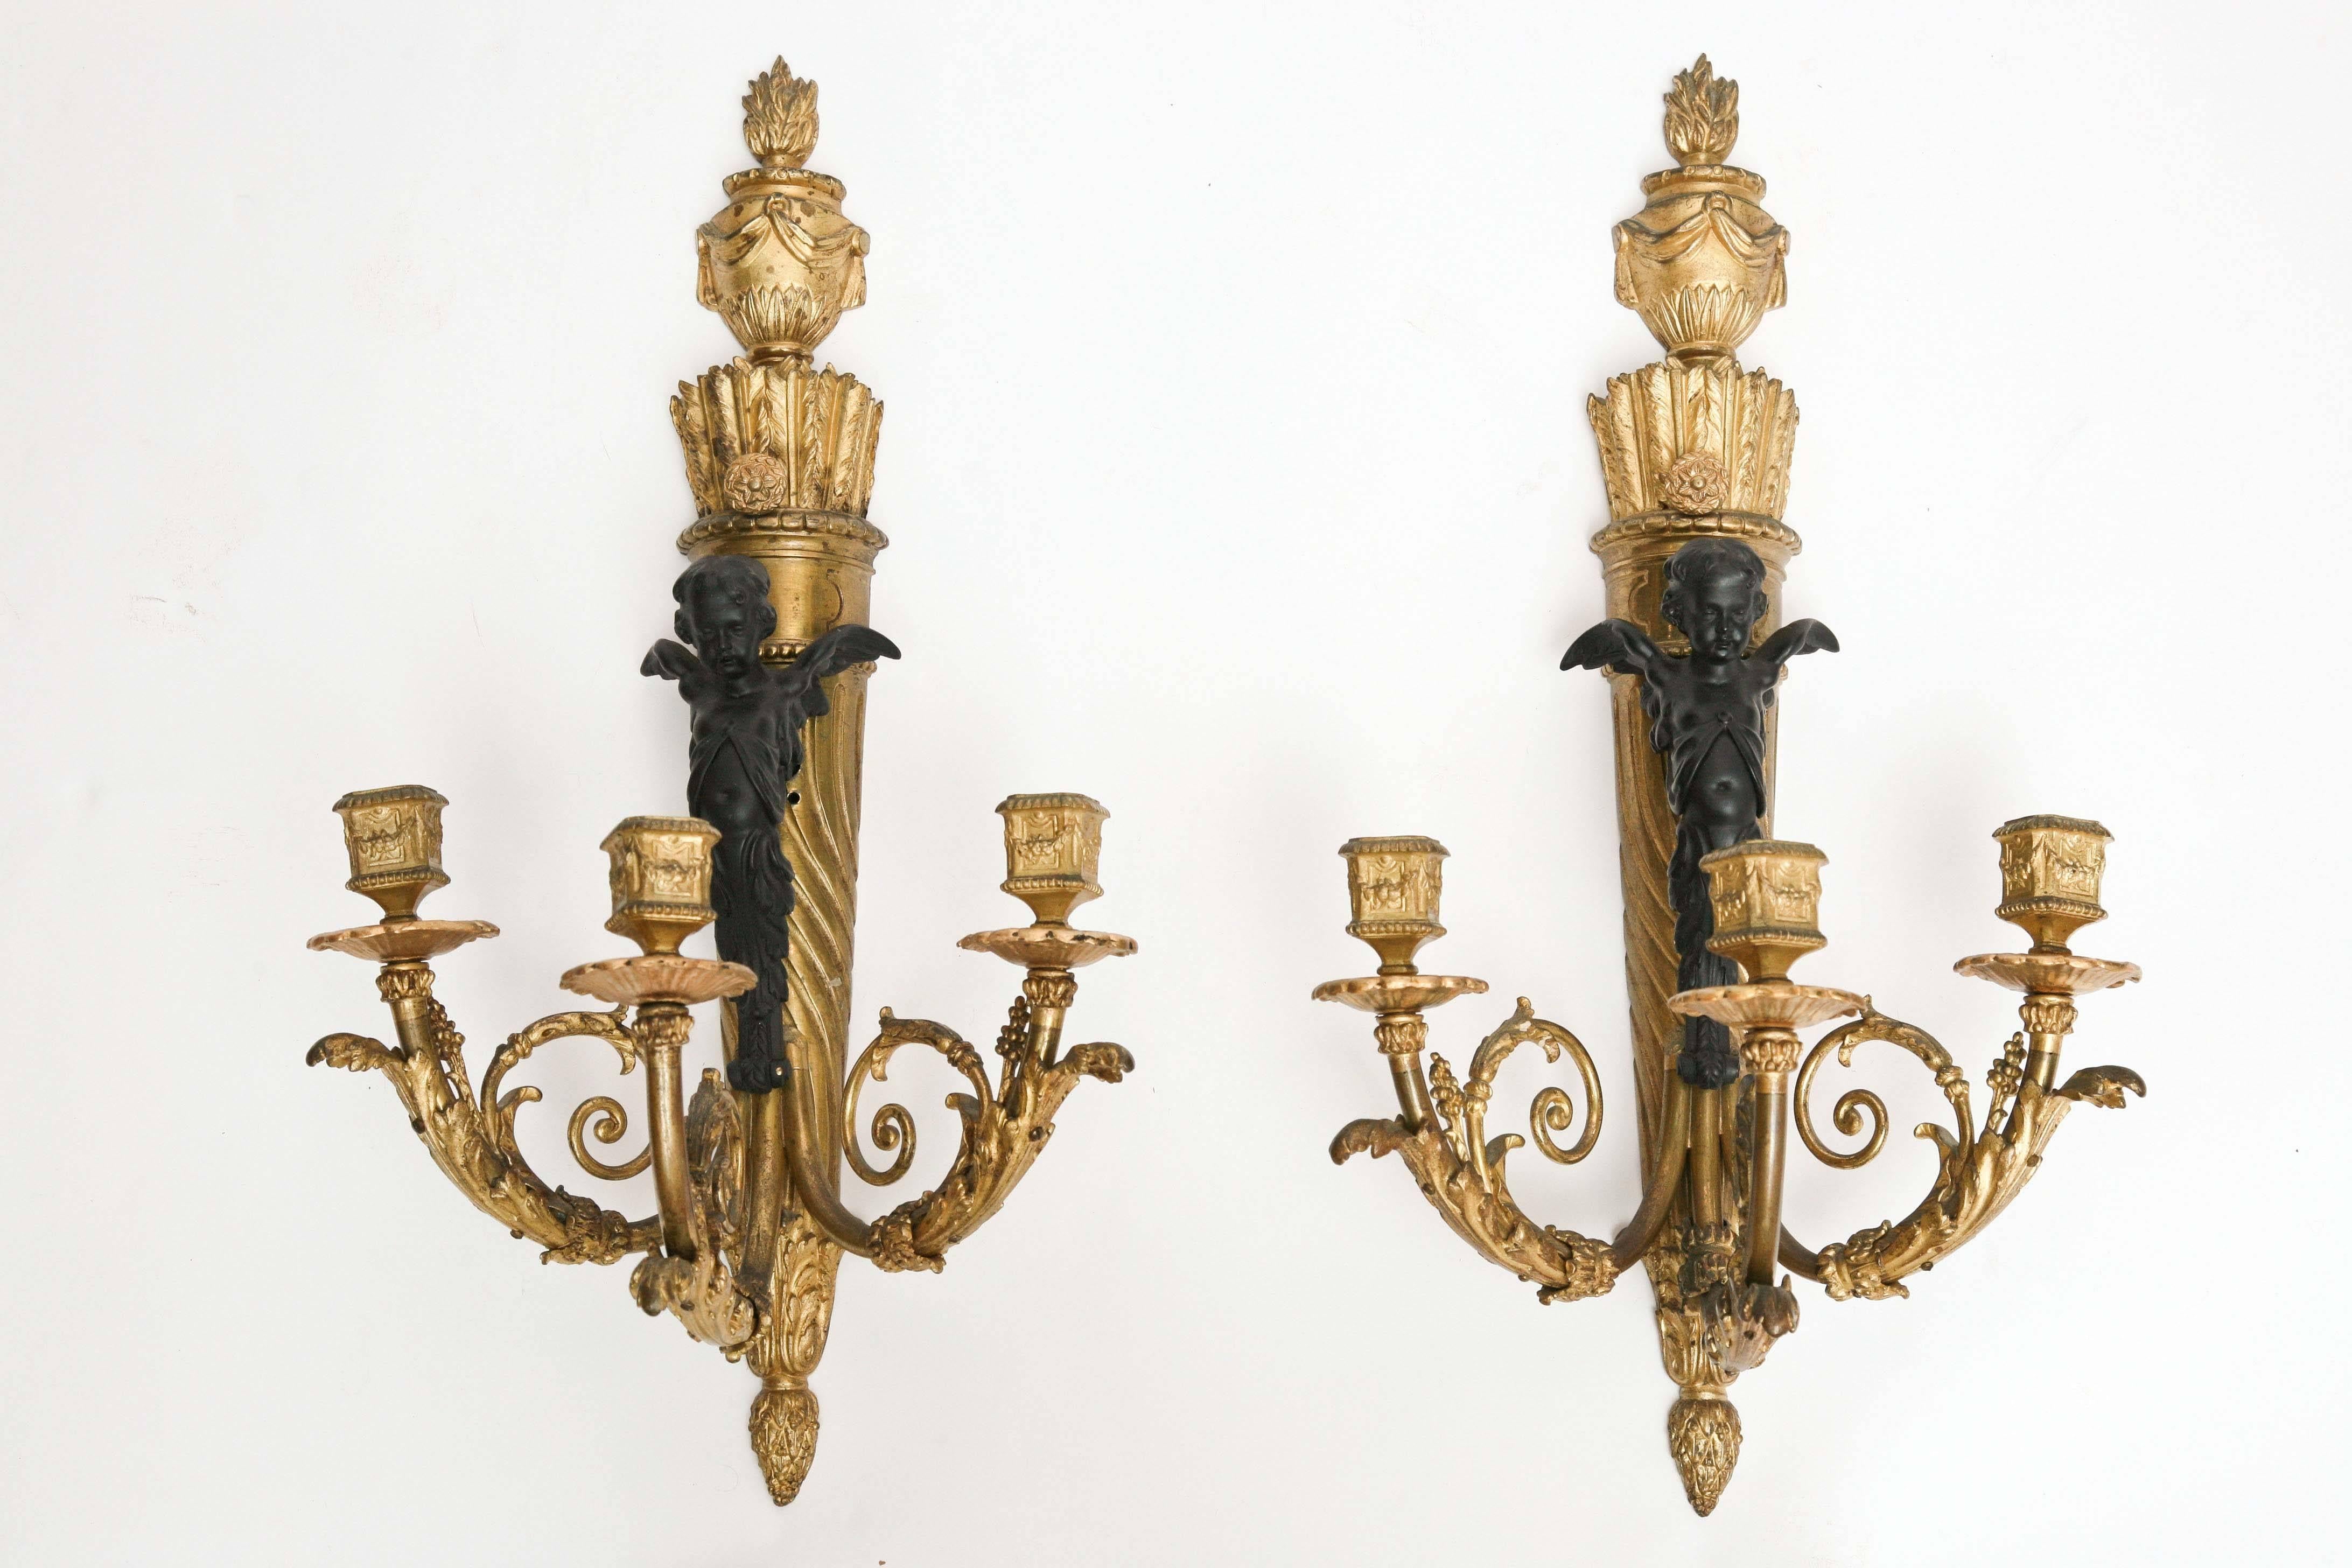 The sconces are fashioned with patinated cherubs.